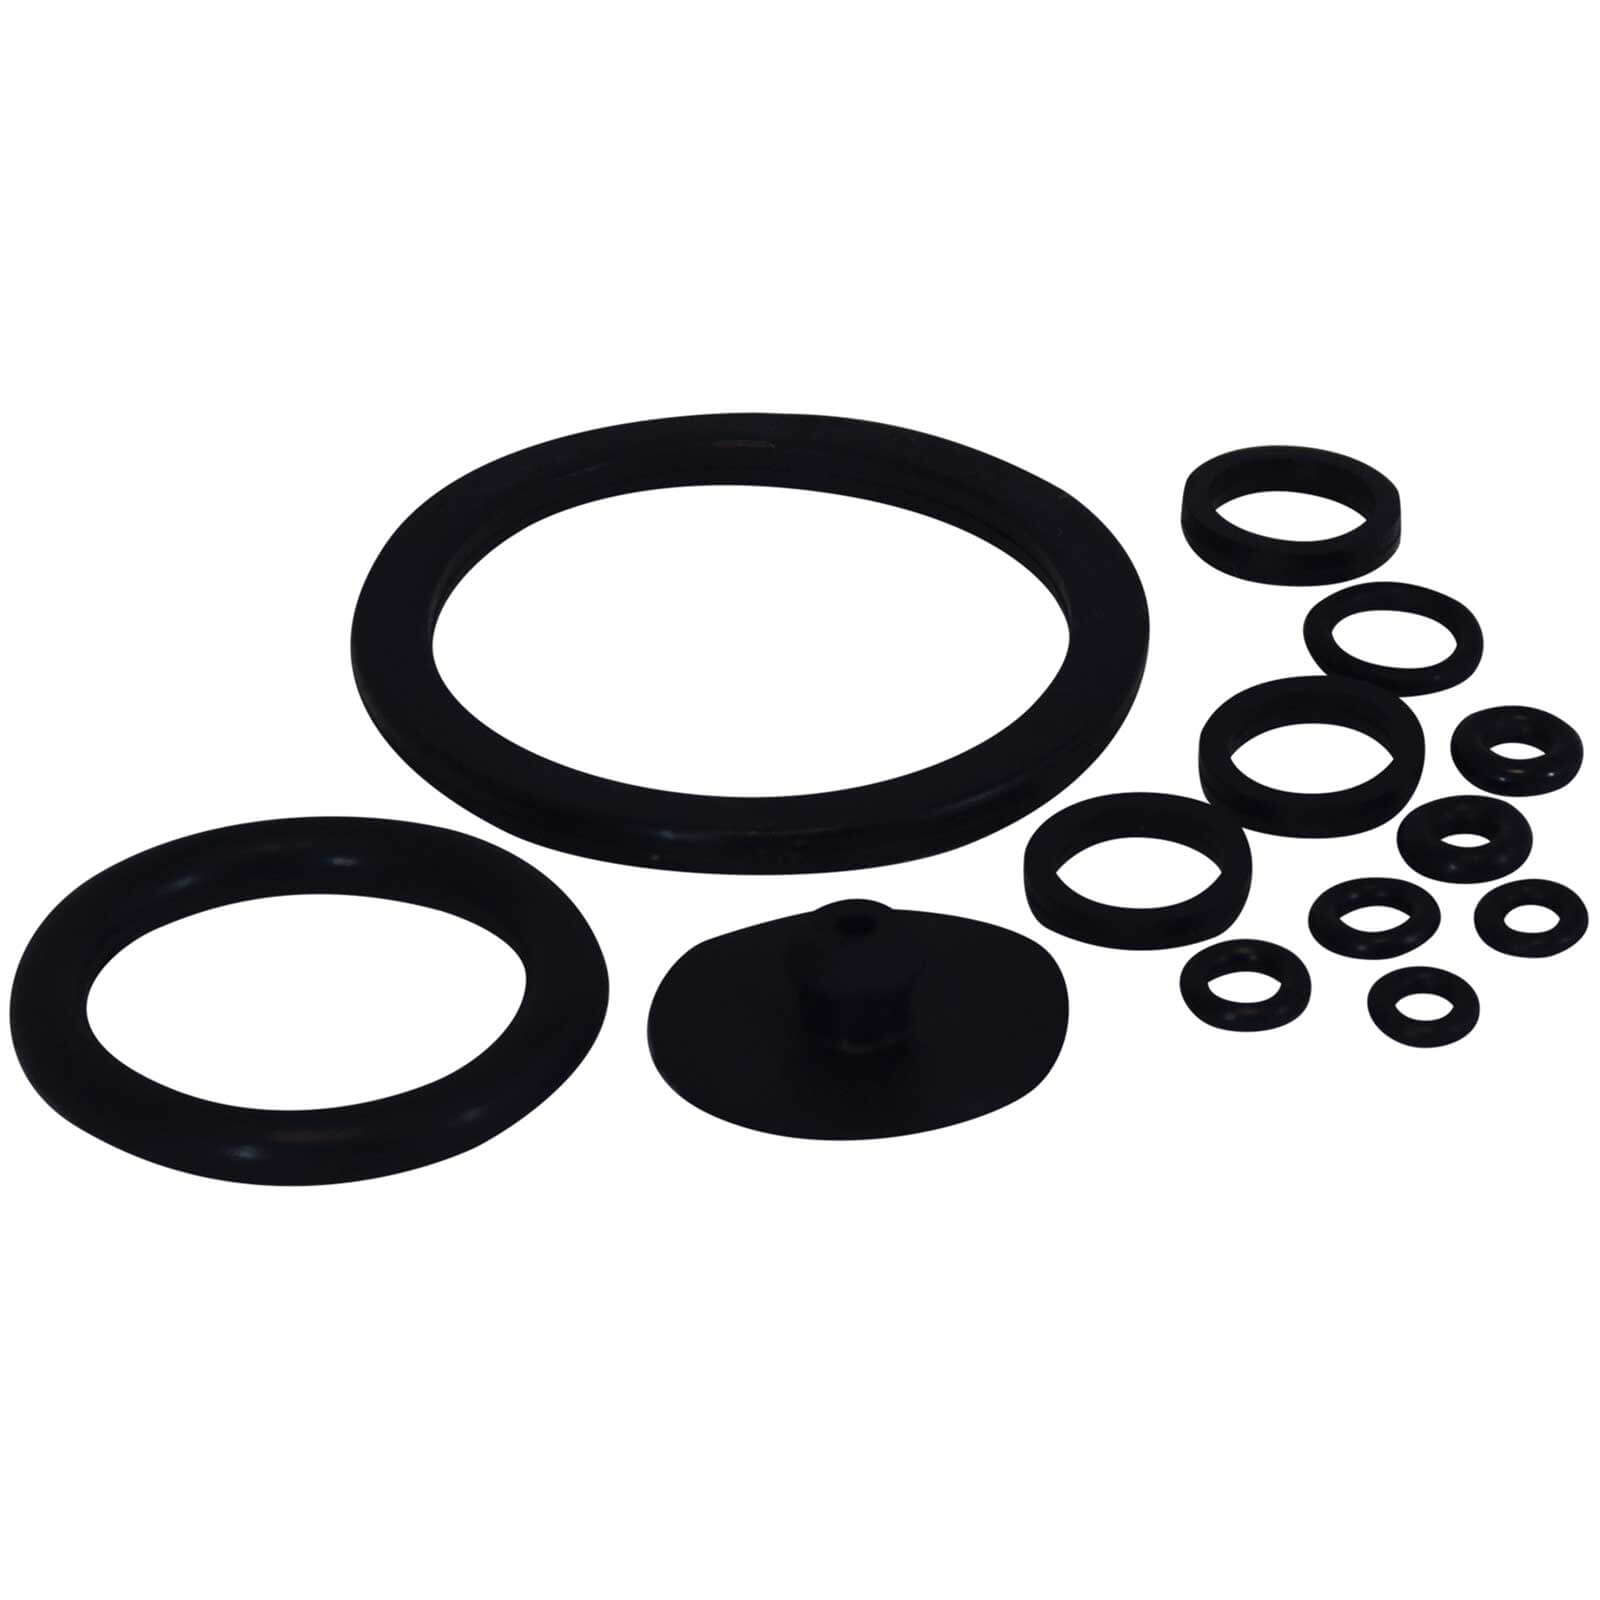 Image of Spear and Jackson Replacement O Rings for 5l Chemical Pressure Sprayers